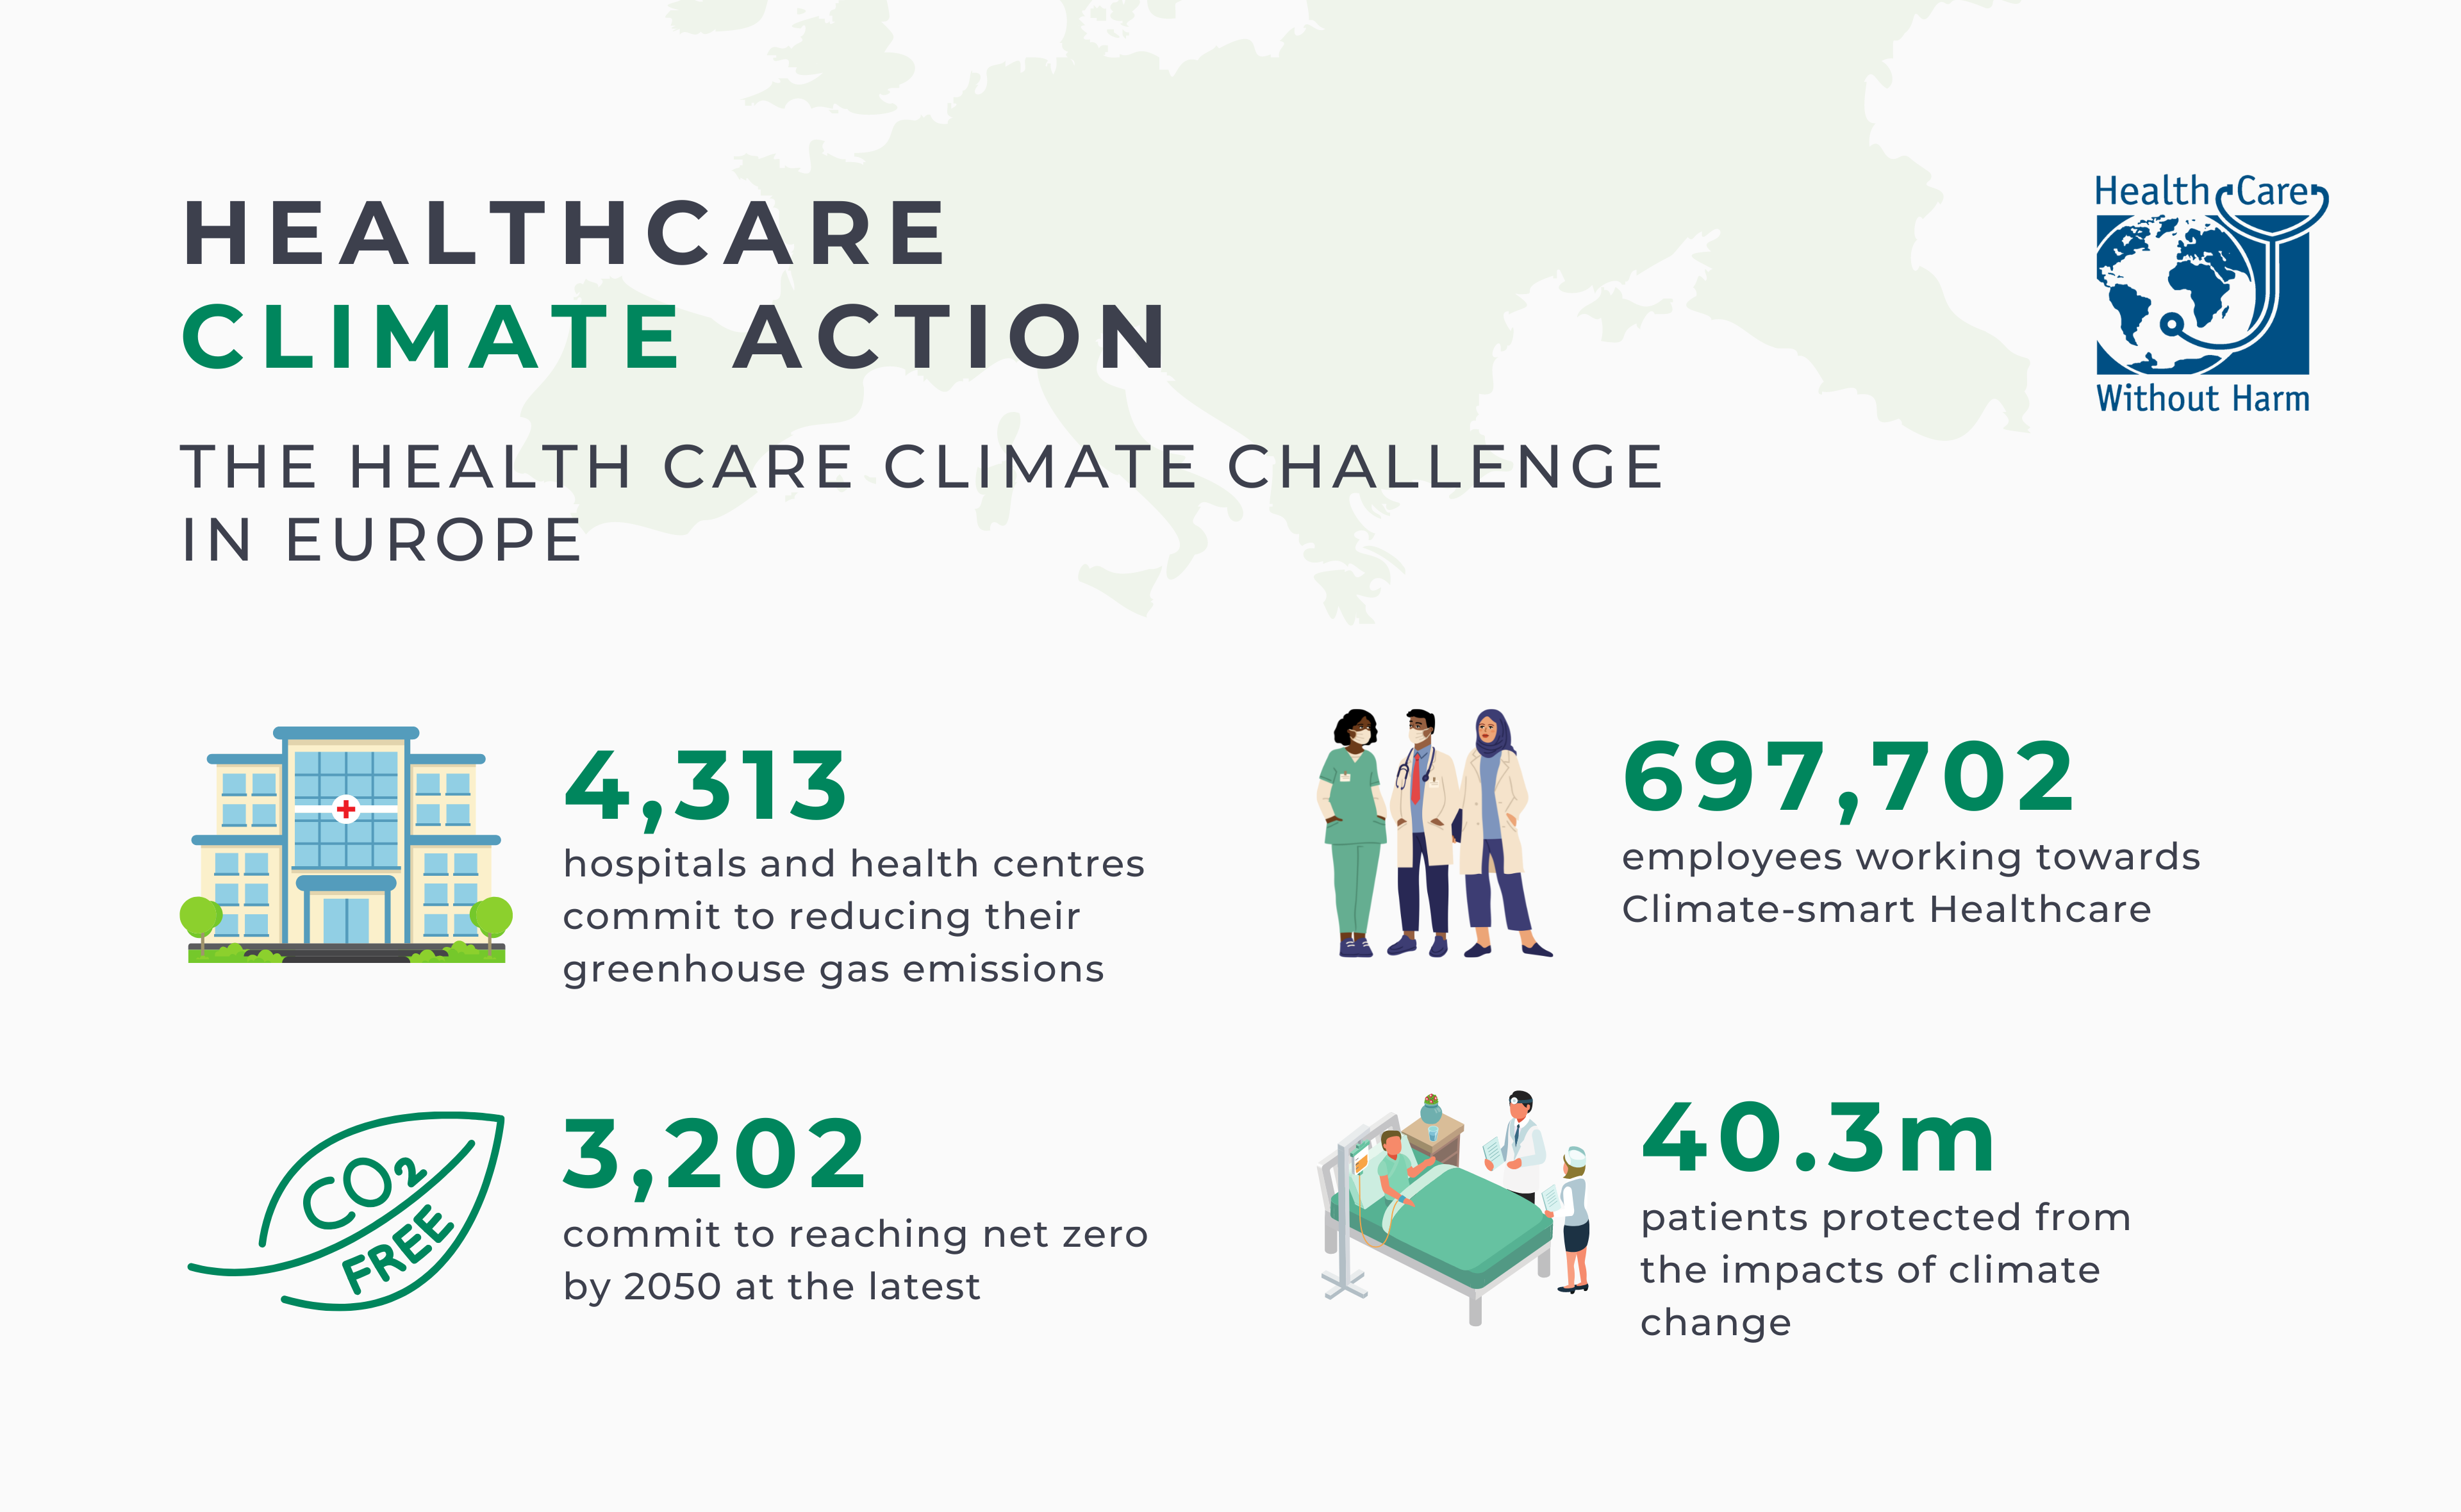 Key figures of healthcare climate action by Health Care Climate Challenge participants in Europe